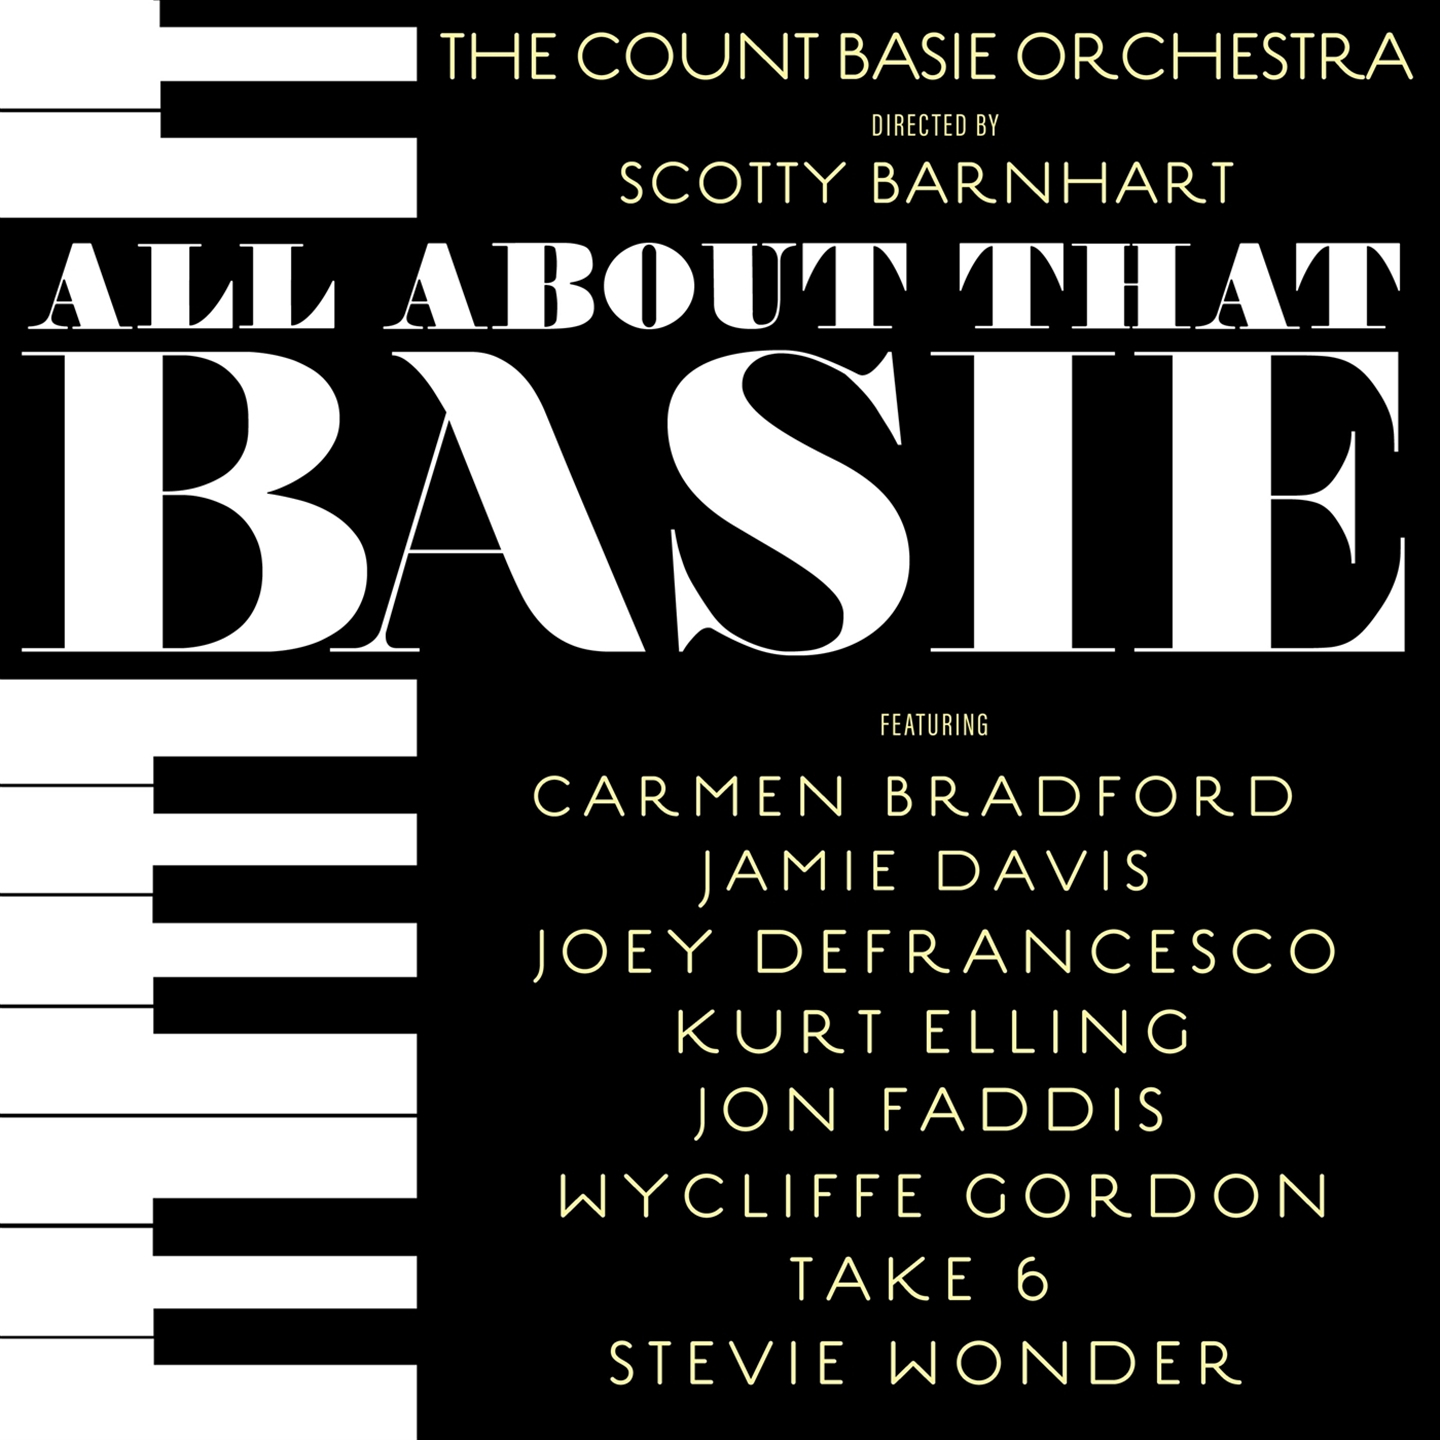 ALL ABOUT THAT BASIE